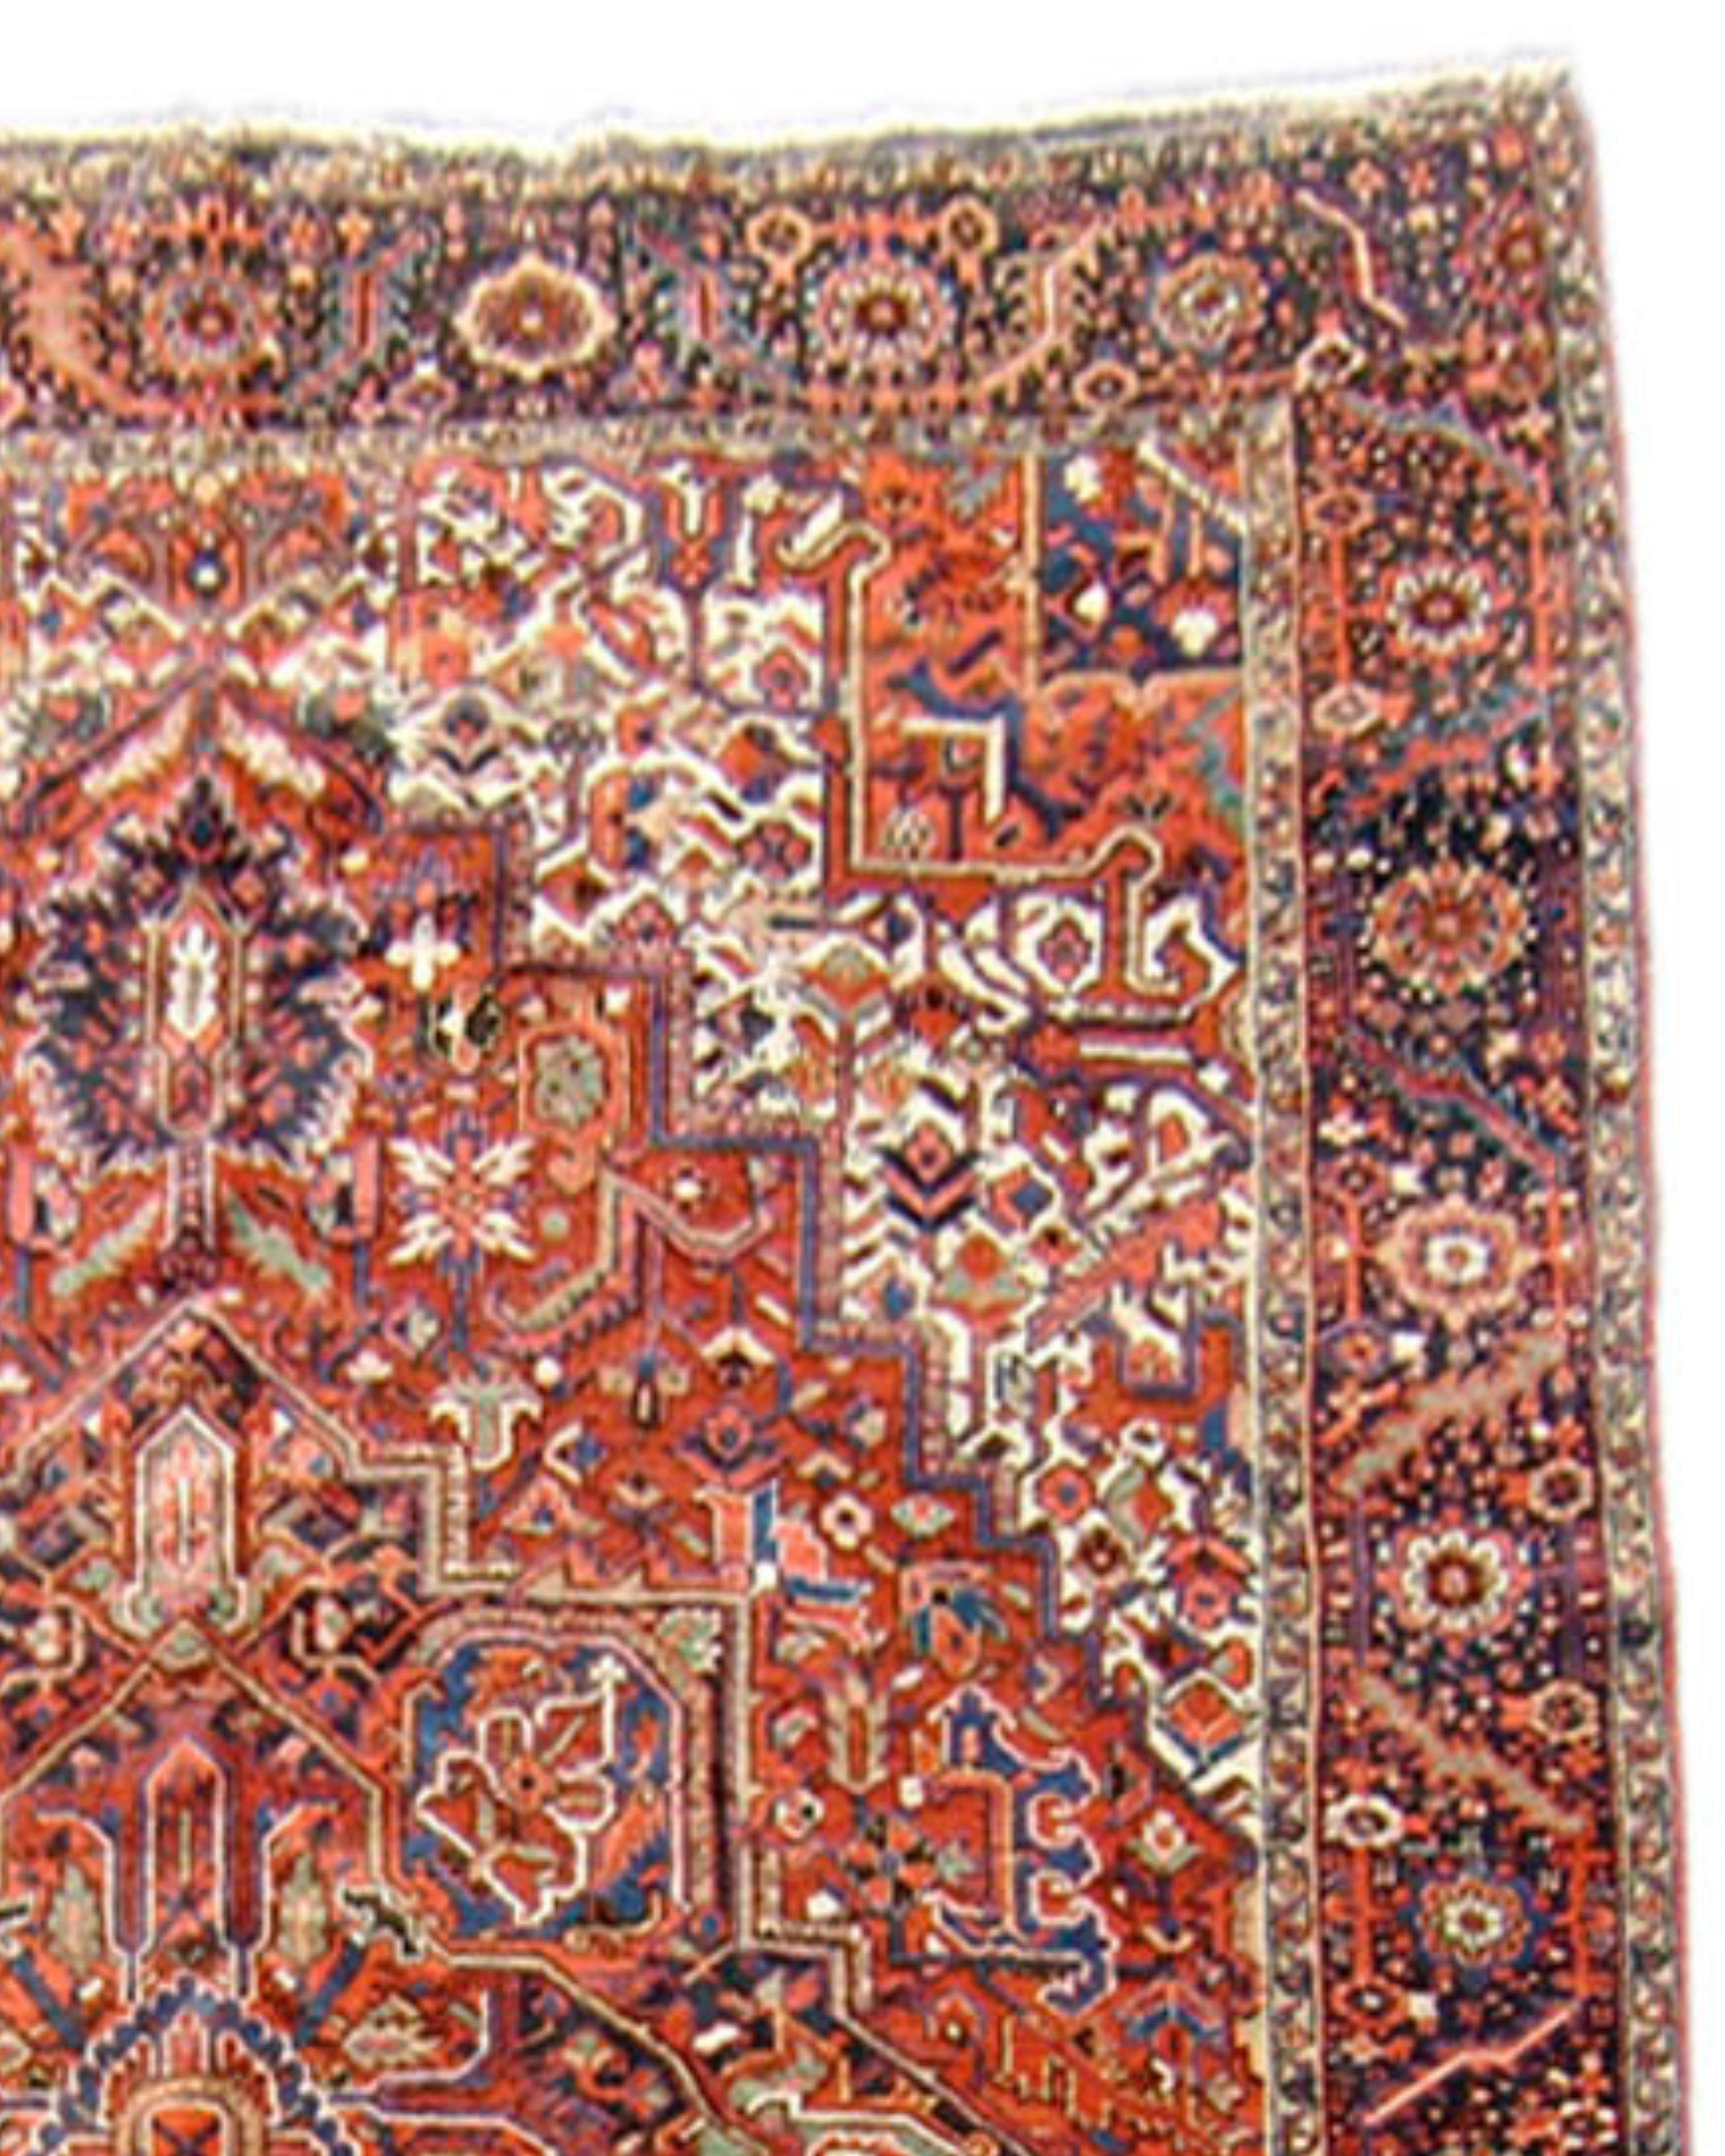 Antique Room-Size Persian Heriz Rug, Mid-20th Century

Additional information:
Dimensions: 9'10